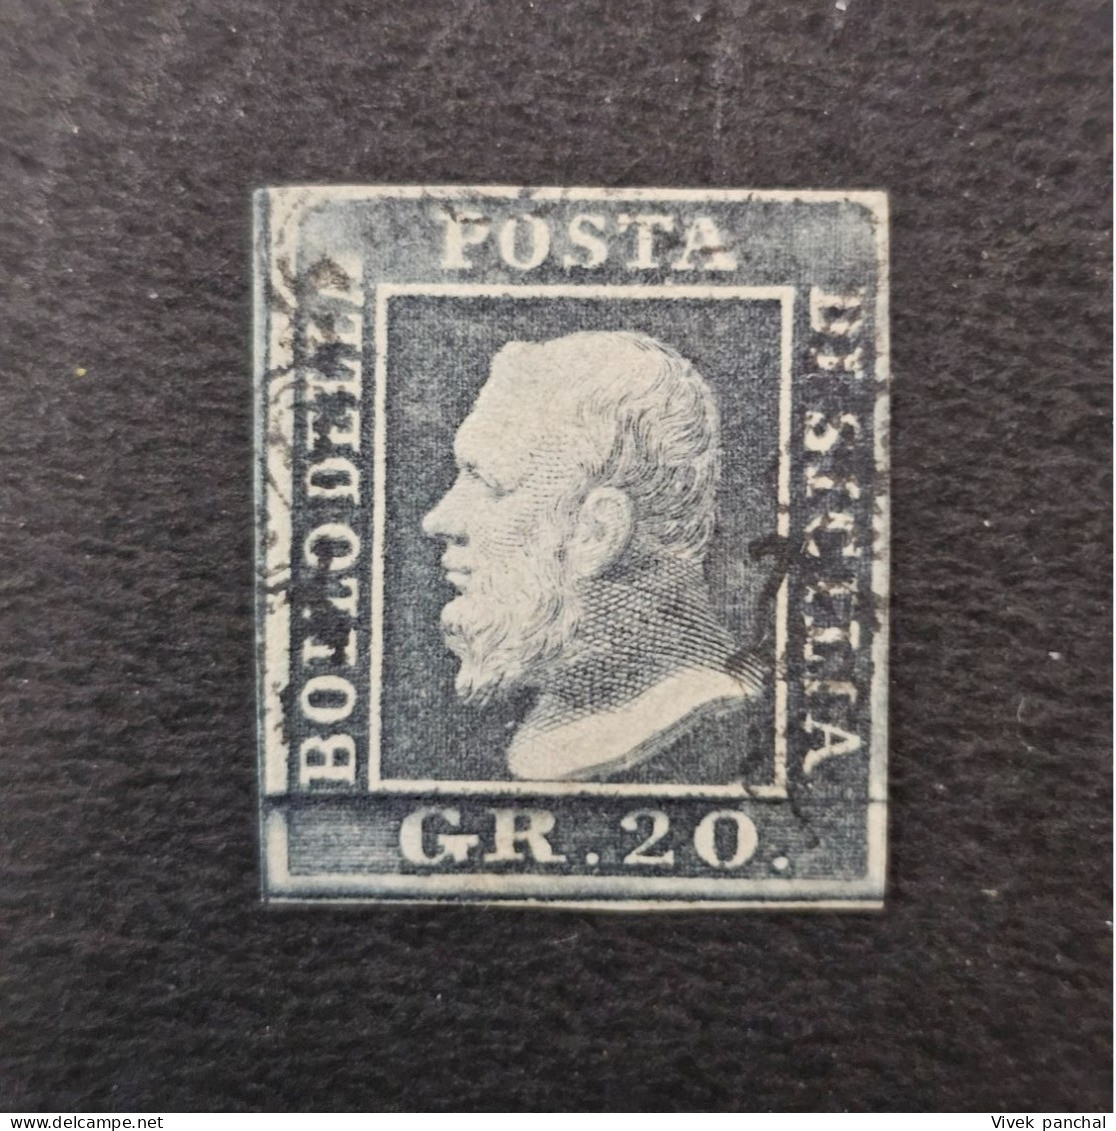 1859 ITALY SICILY SC# 17a 20gr GRIGIO ARDESIA USED WITH CERTIFICATE - Sicile